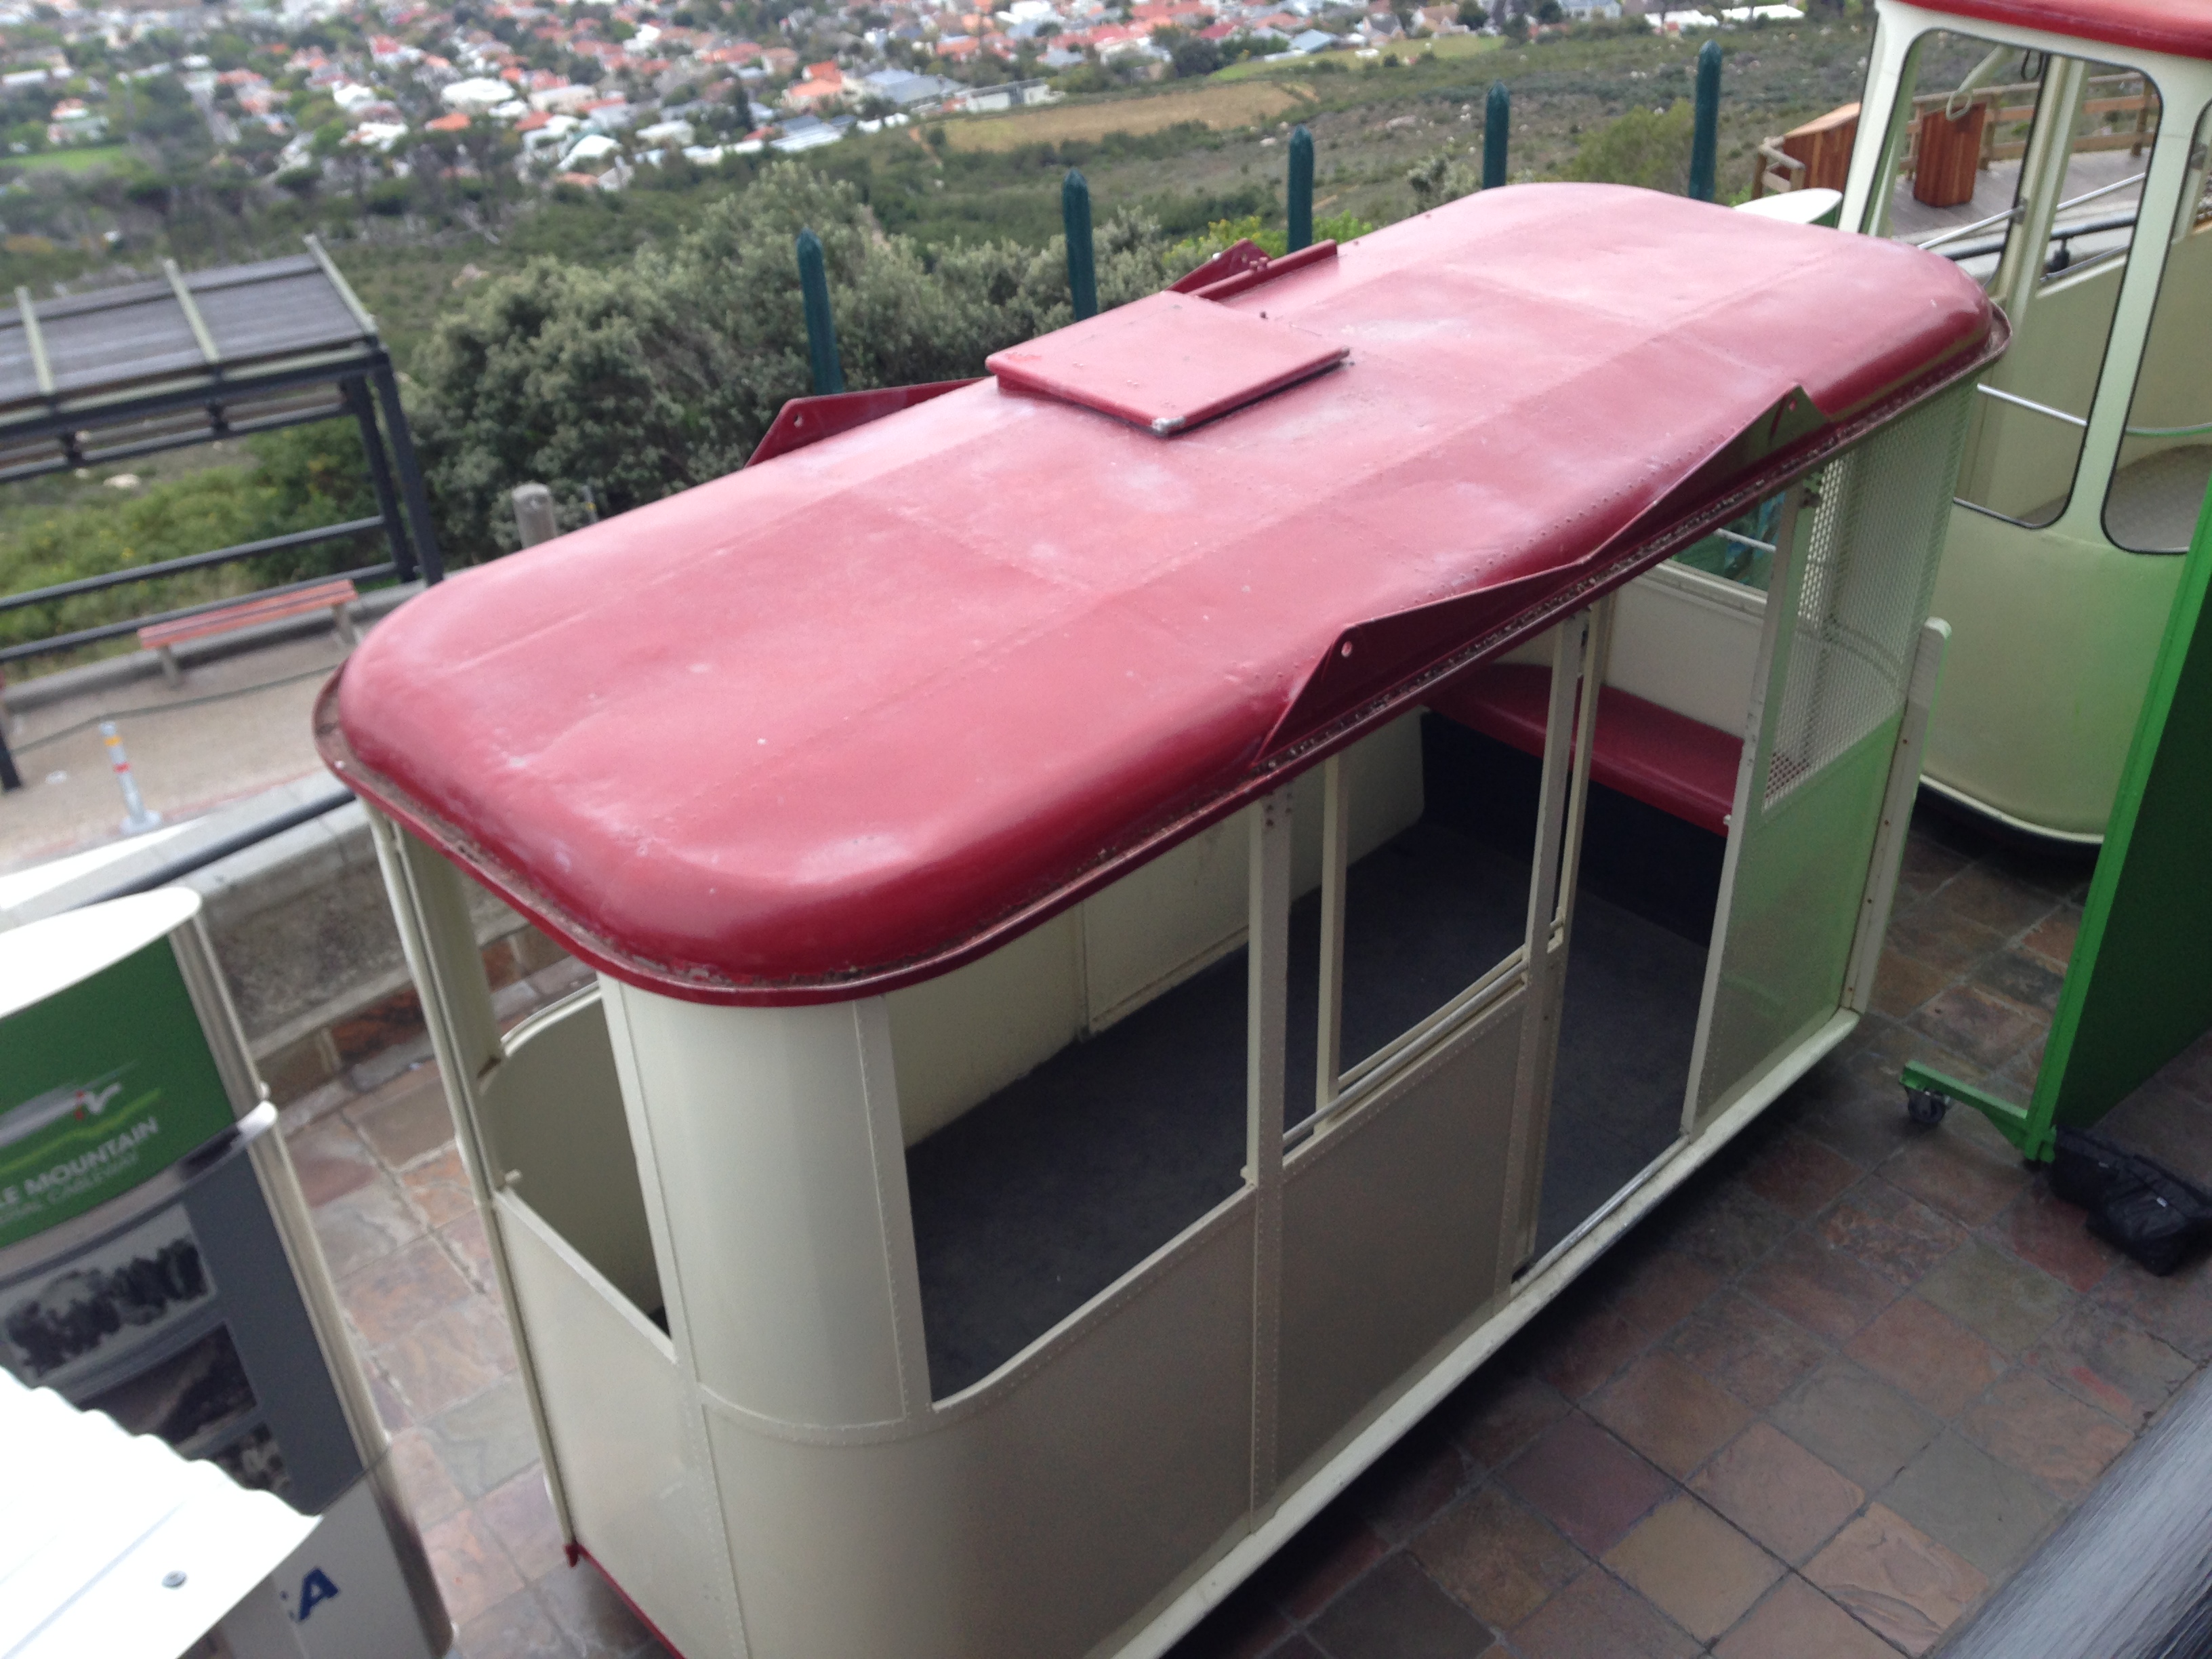 Table Mountain cable car - then. A train car hanging on a cable - yikes!